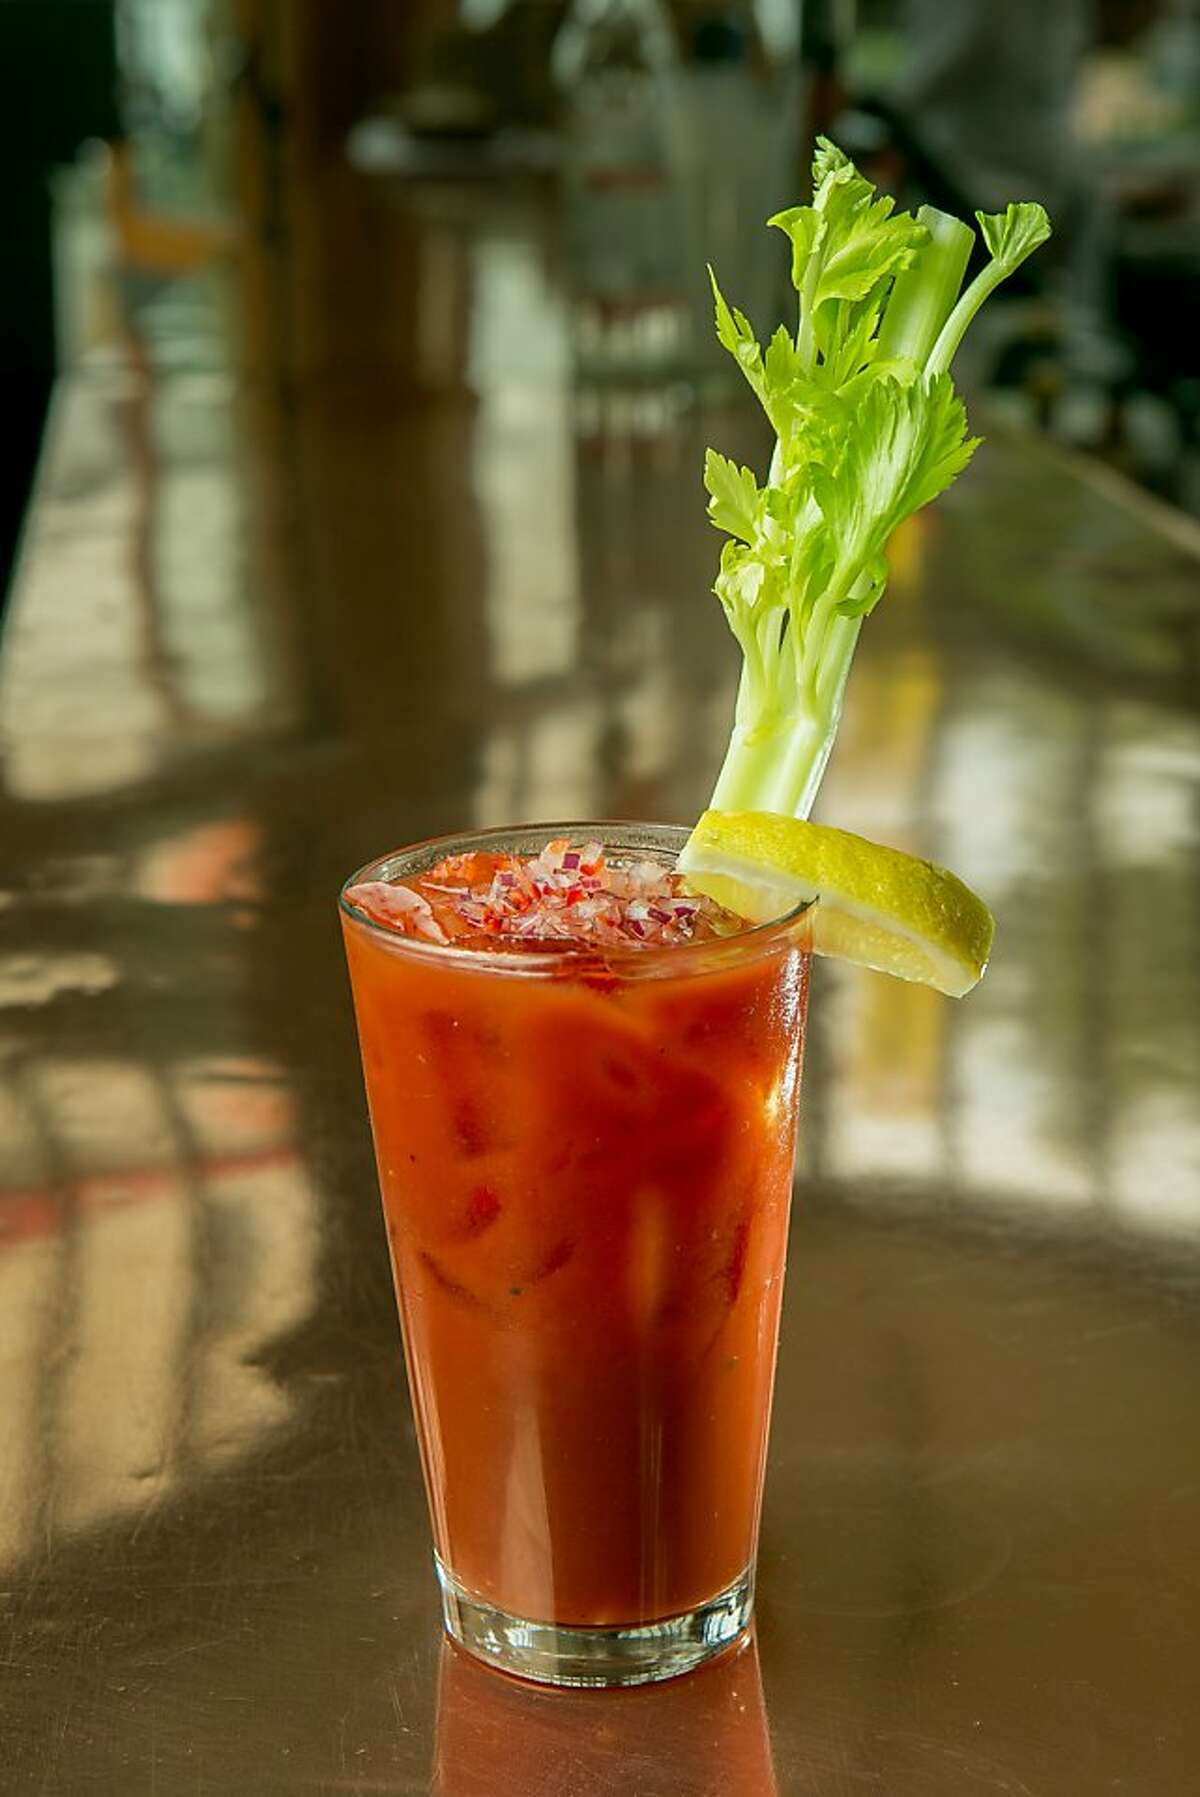 The Balsamic Bloody Mary at the Zuni Cafe in San Francisco, Calif., is seen on Tuesday, July 23rd, 2013.